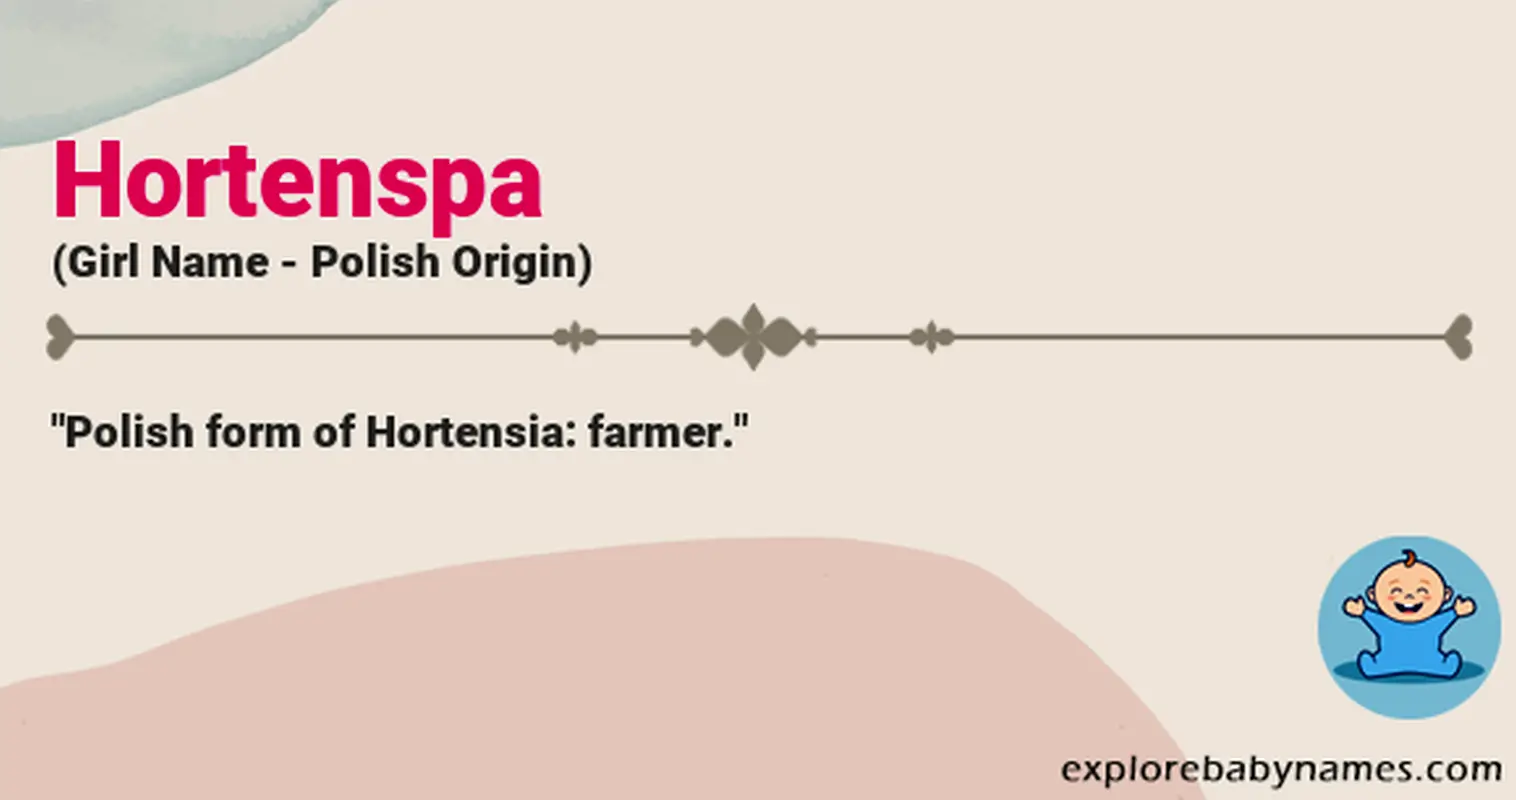 Meaning of Hortenspa